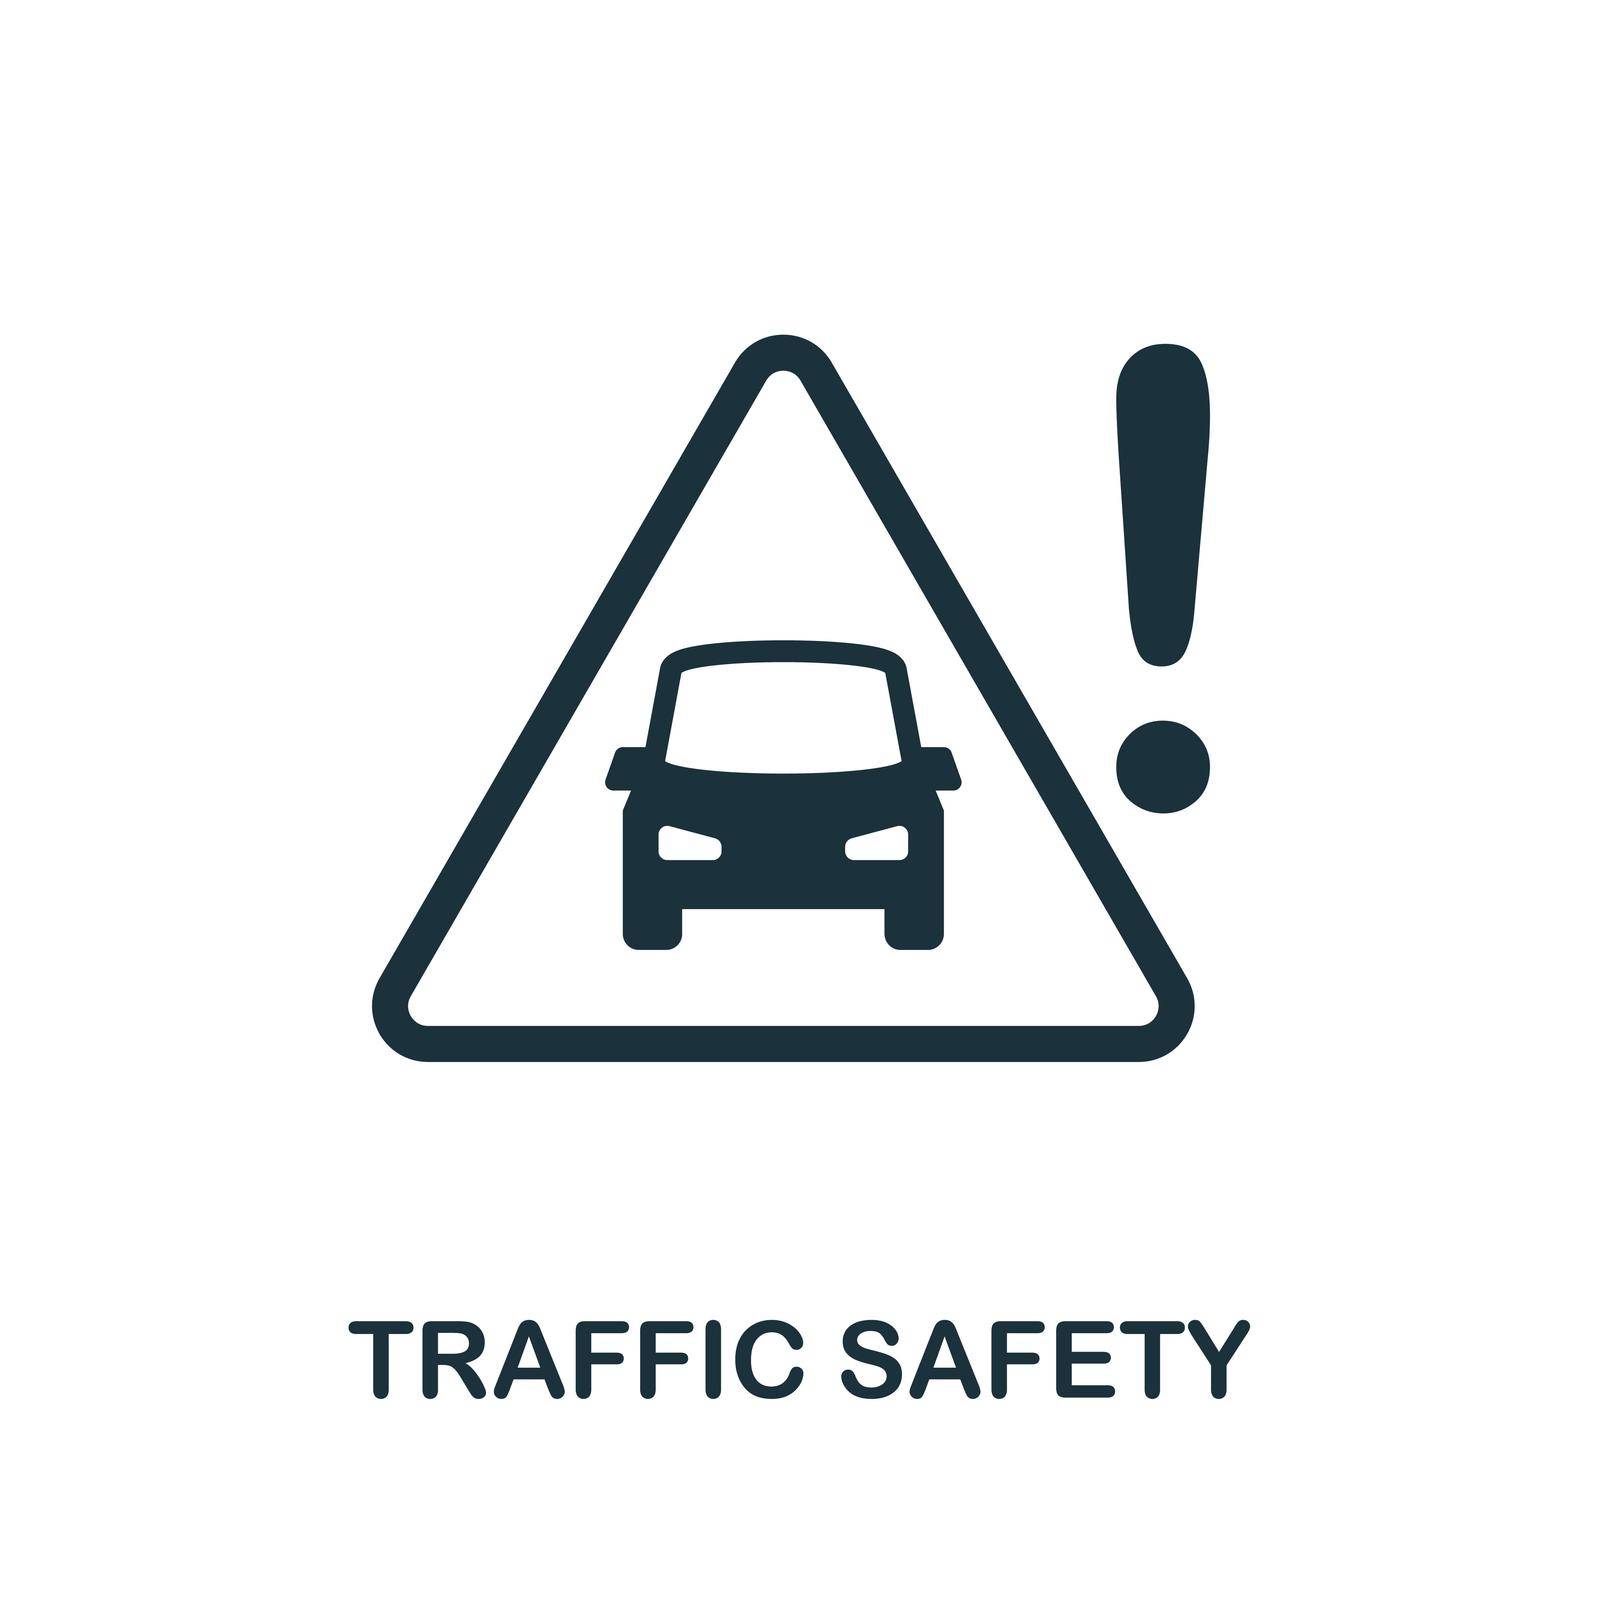 Traffic Safety icon. Simple line element traffic safety symbol for templates, web design and infographics.